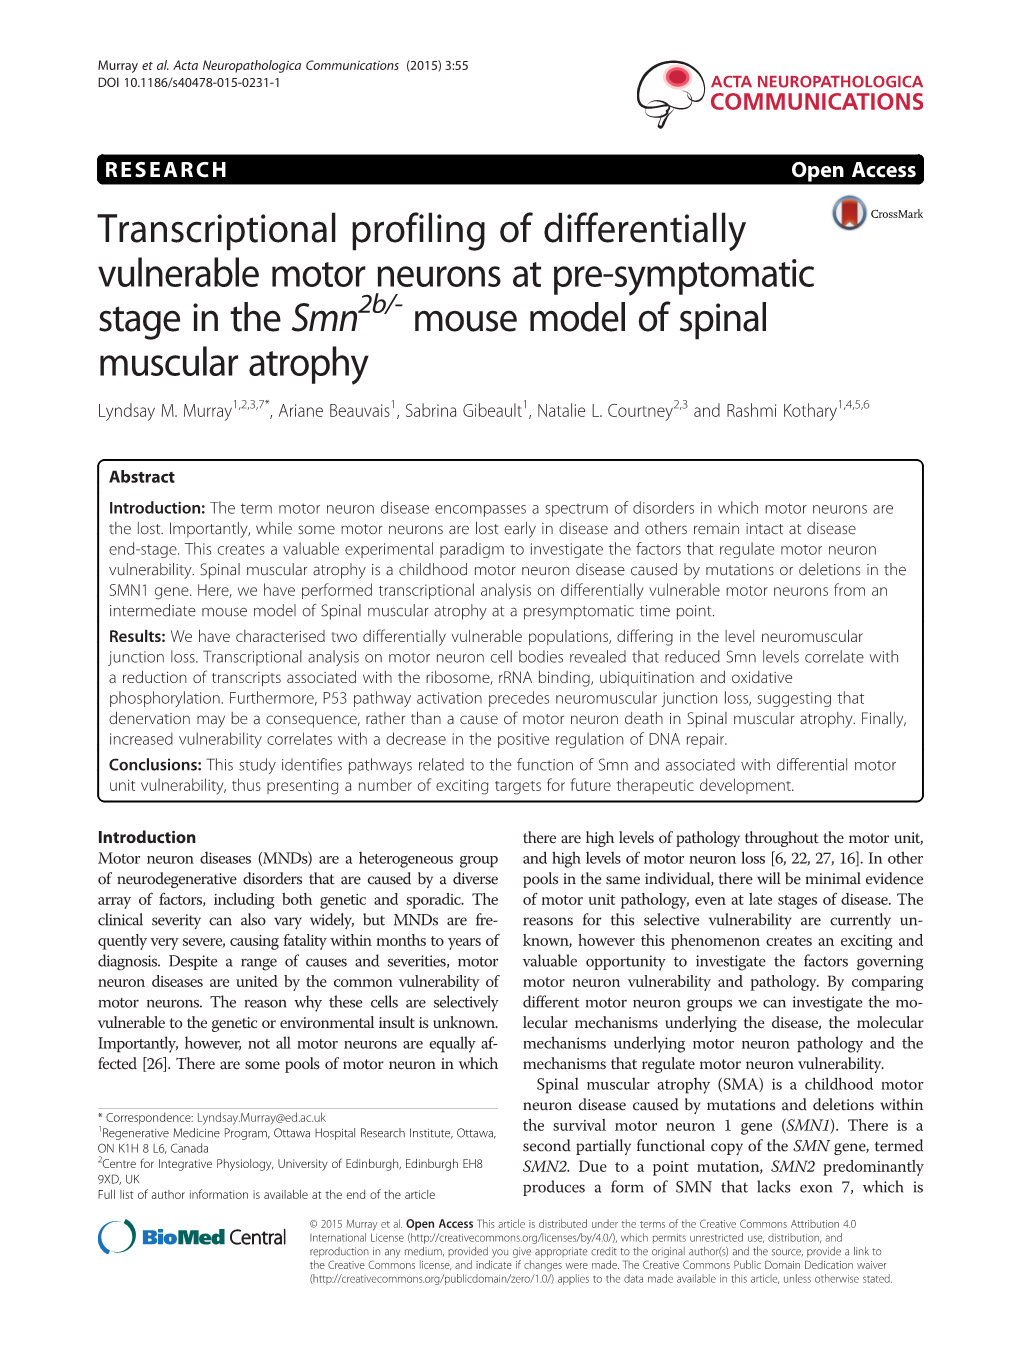 Transcriptional Profiling of Differentially Vulnerable Motor Neurons at Pre-Symptomatic Stage in the Smn2b/- Mouse Model of Spinal Muscular Atrophy Lyndsay M